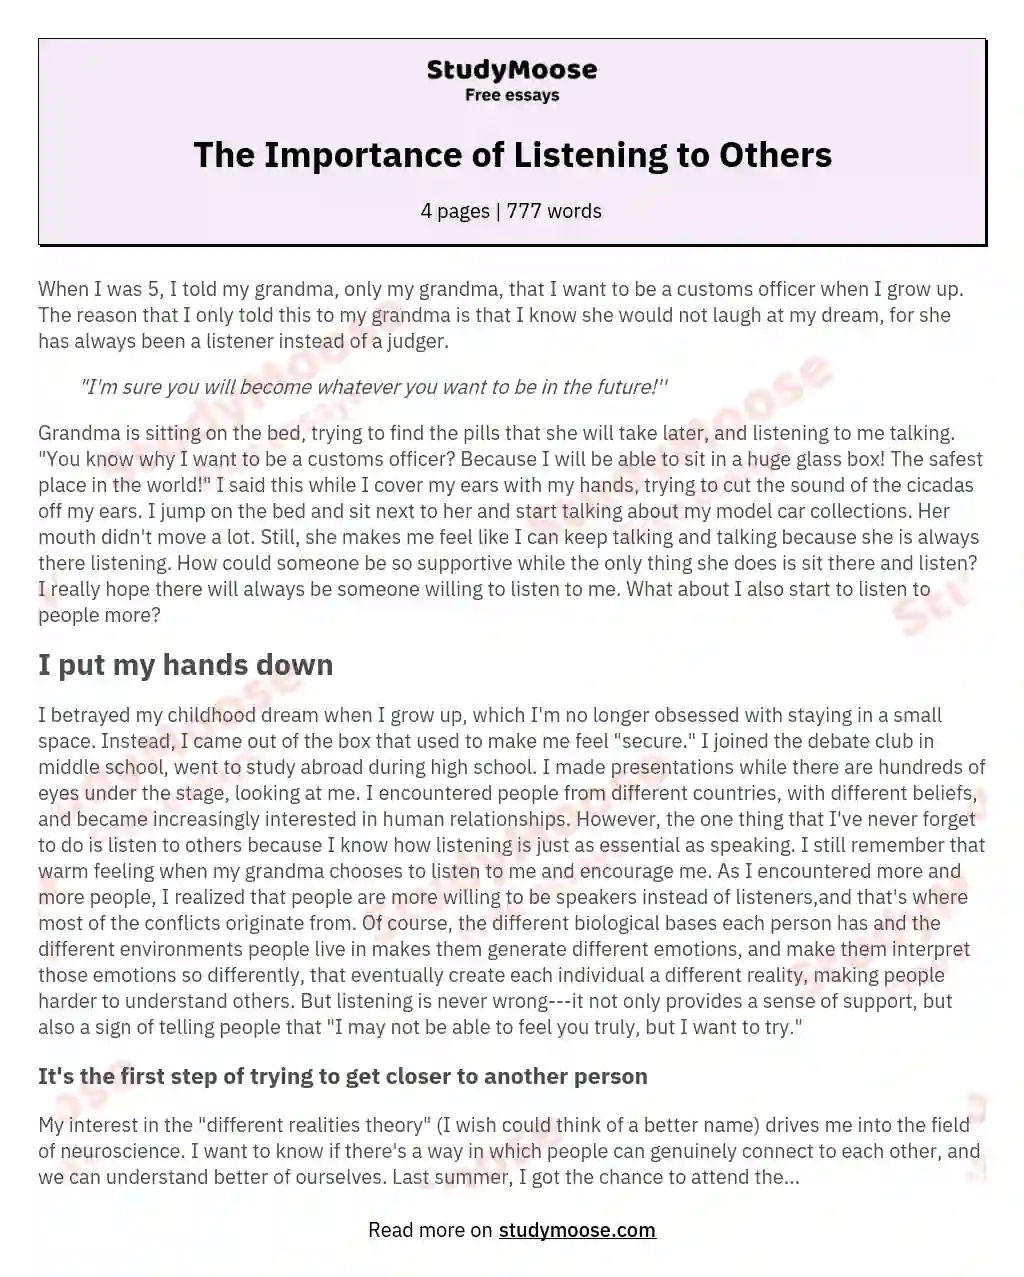 The Importance of Listening to Others essay